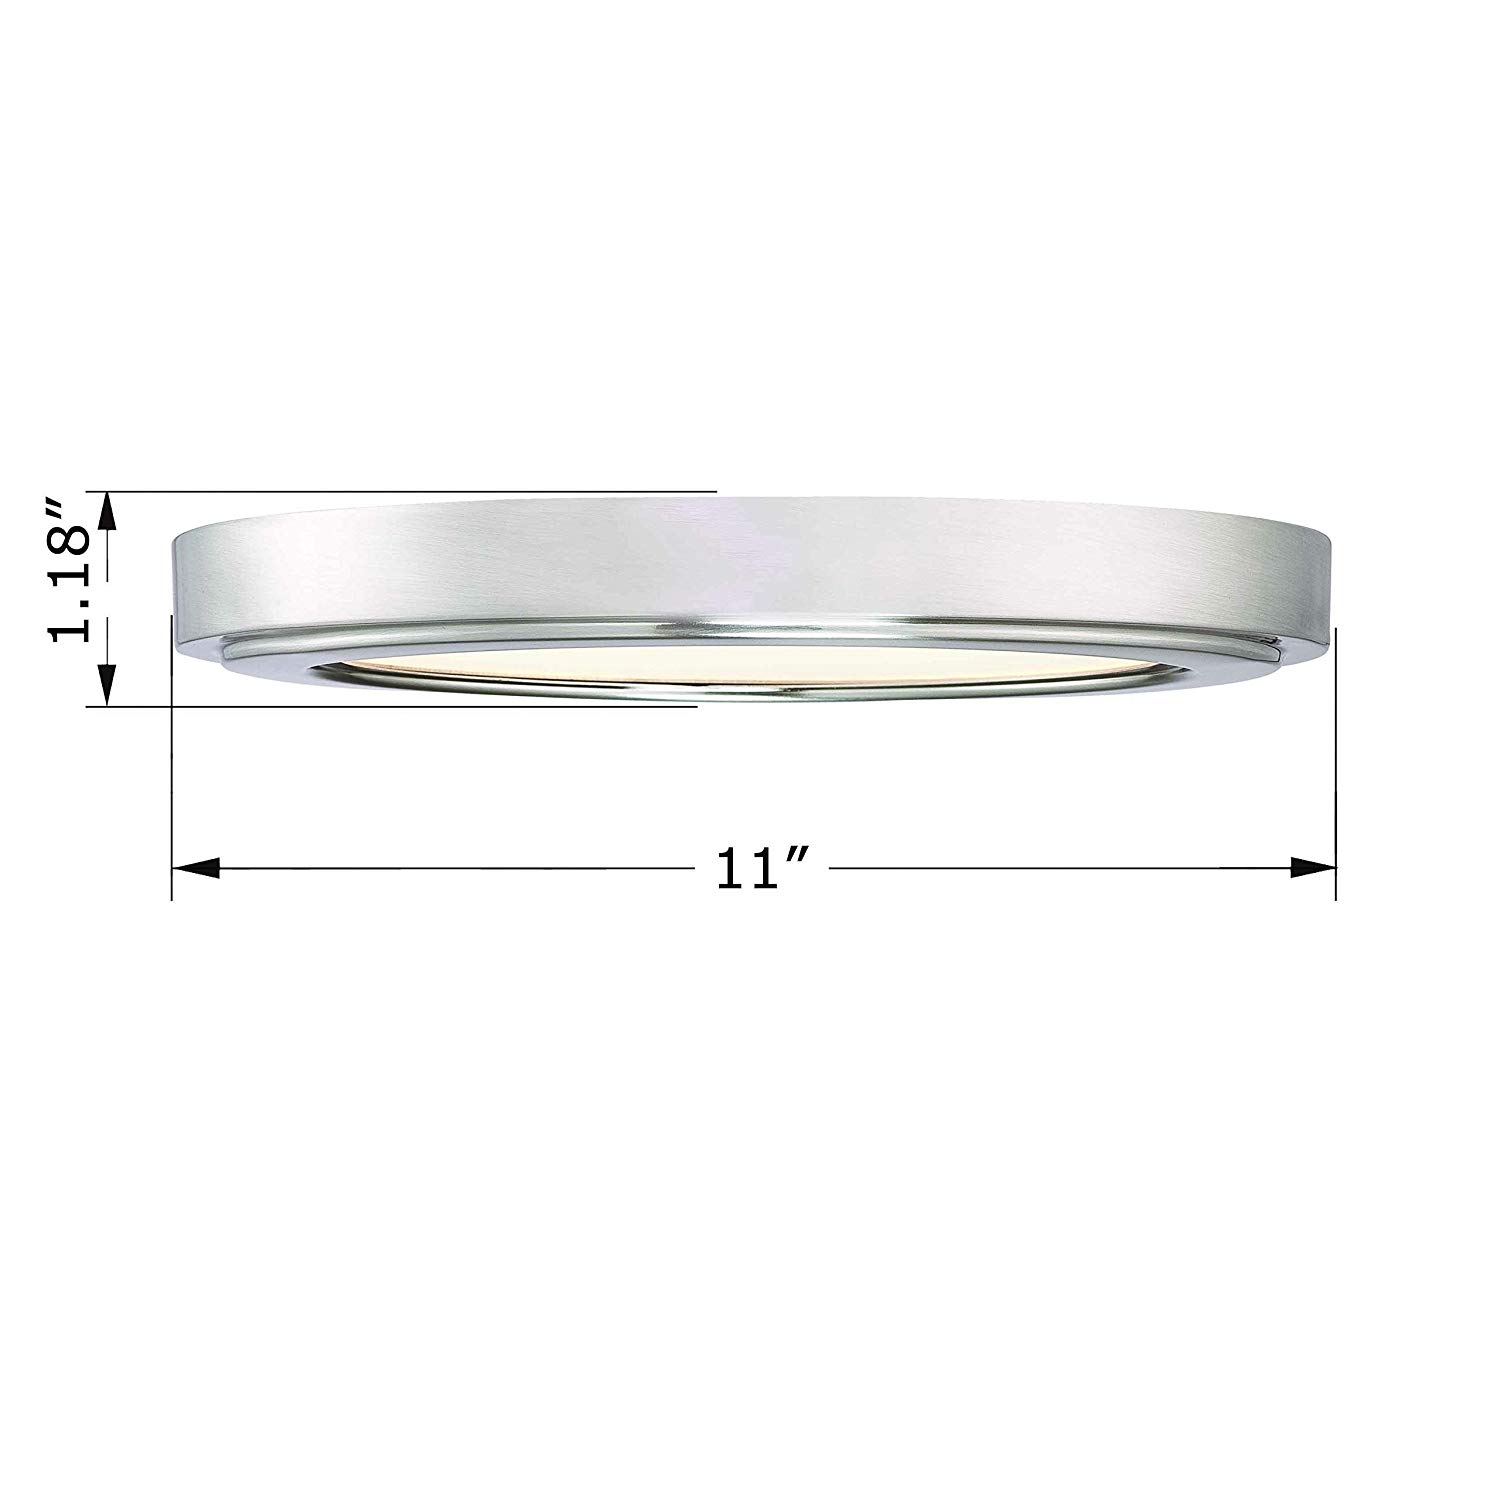 GRUENLICH LED Flush Mount Ceiling Light Fixture, 11 Inch Slim Edge Light, Dimmable 12.5W 830 Lumen, Metal Housing with Nickel Finish, ETL Rated, 2-Pack